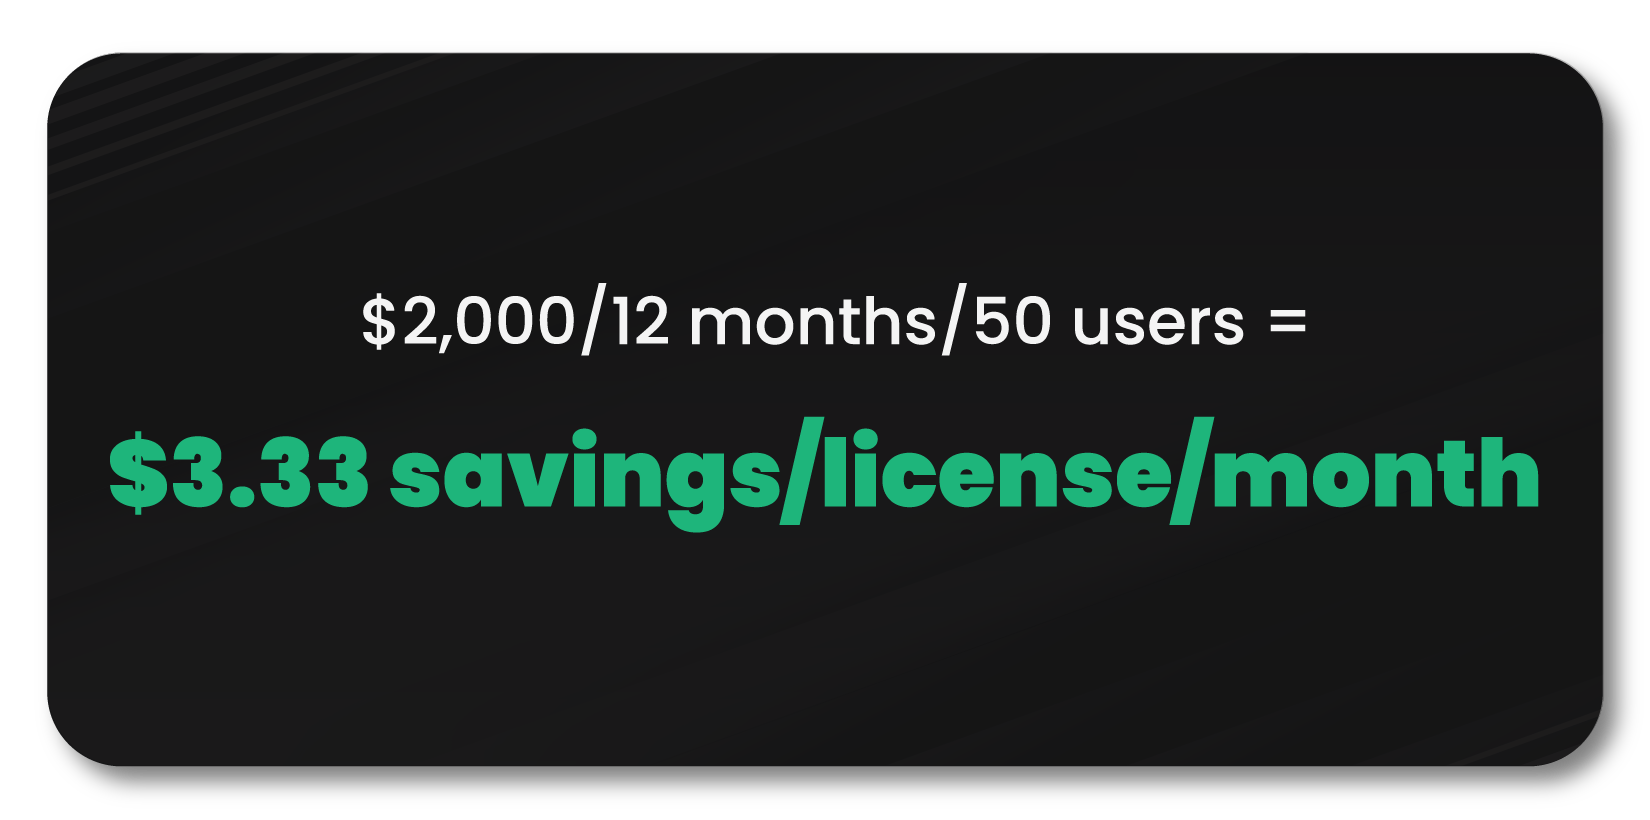 $2,000/12 months/50 users = $3.33 savings/license/month